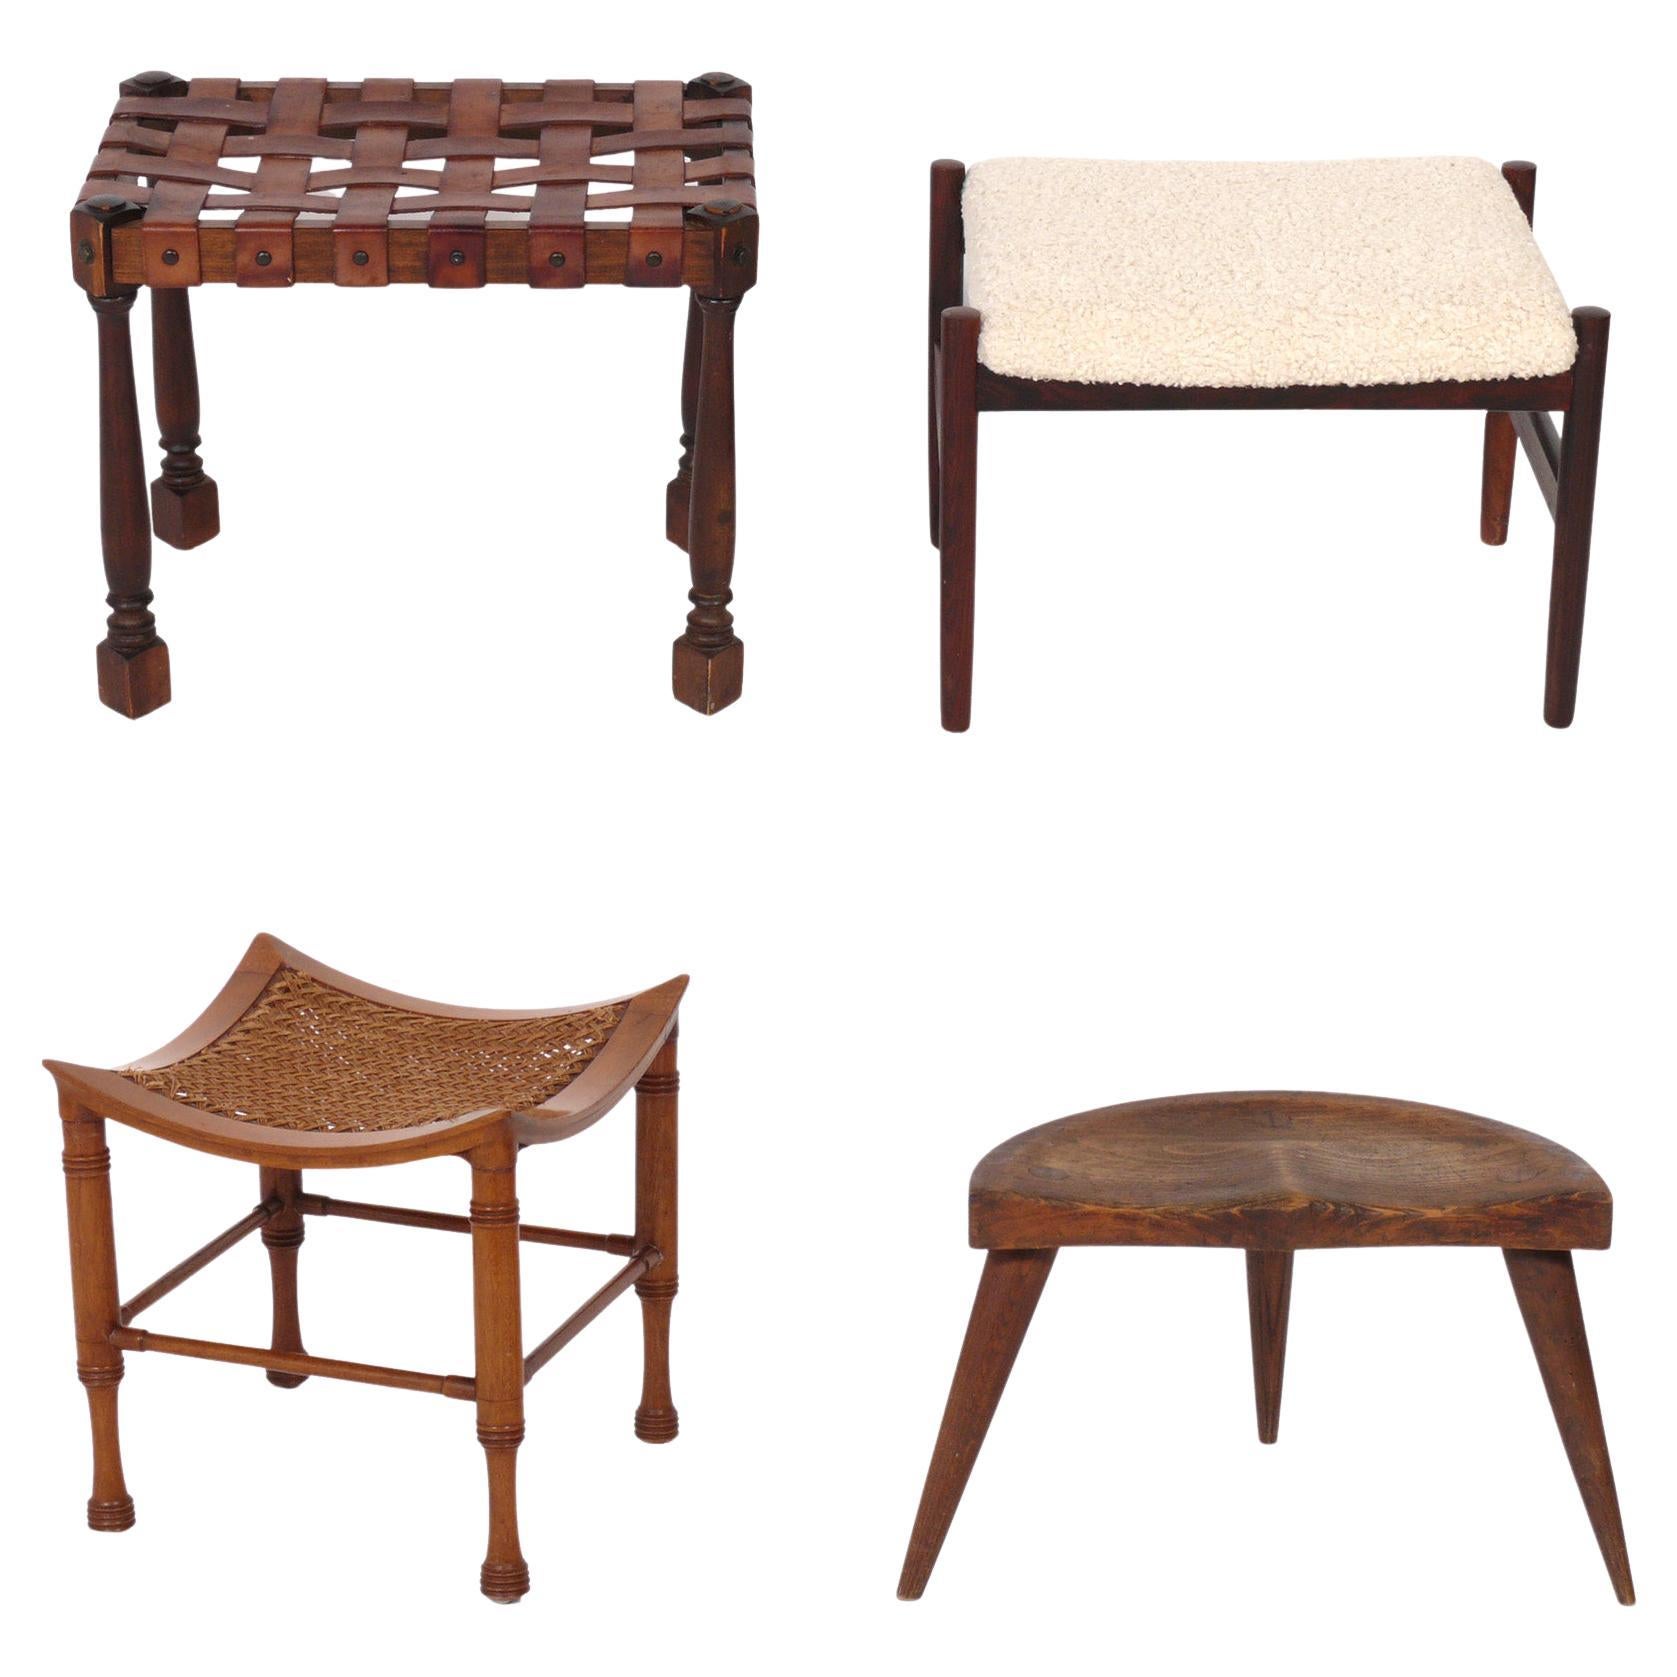 Selection of Wood Stools For Sale